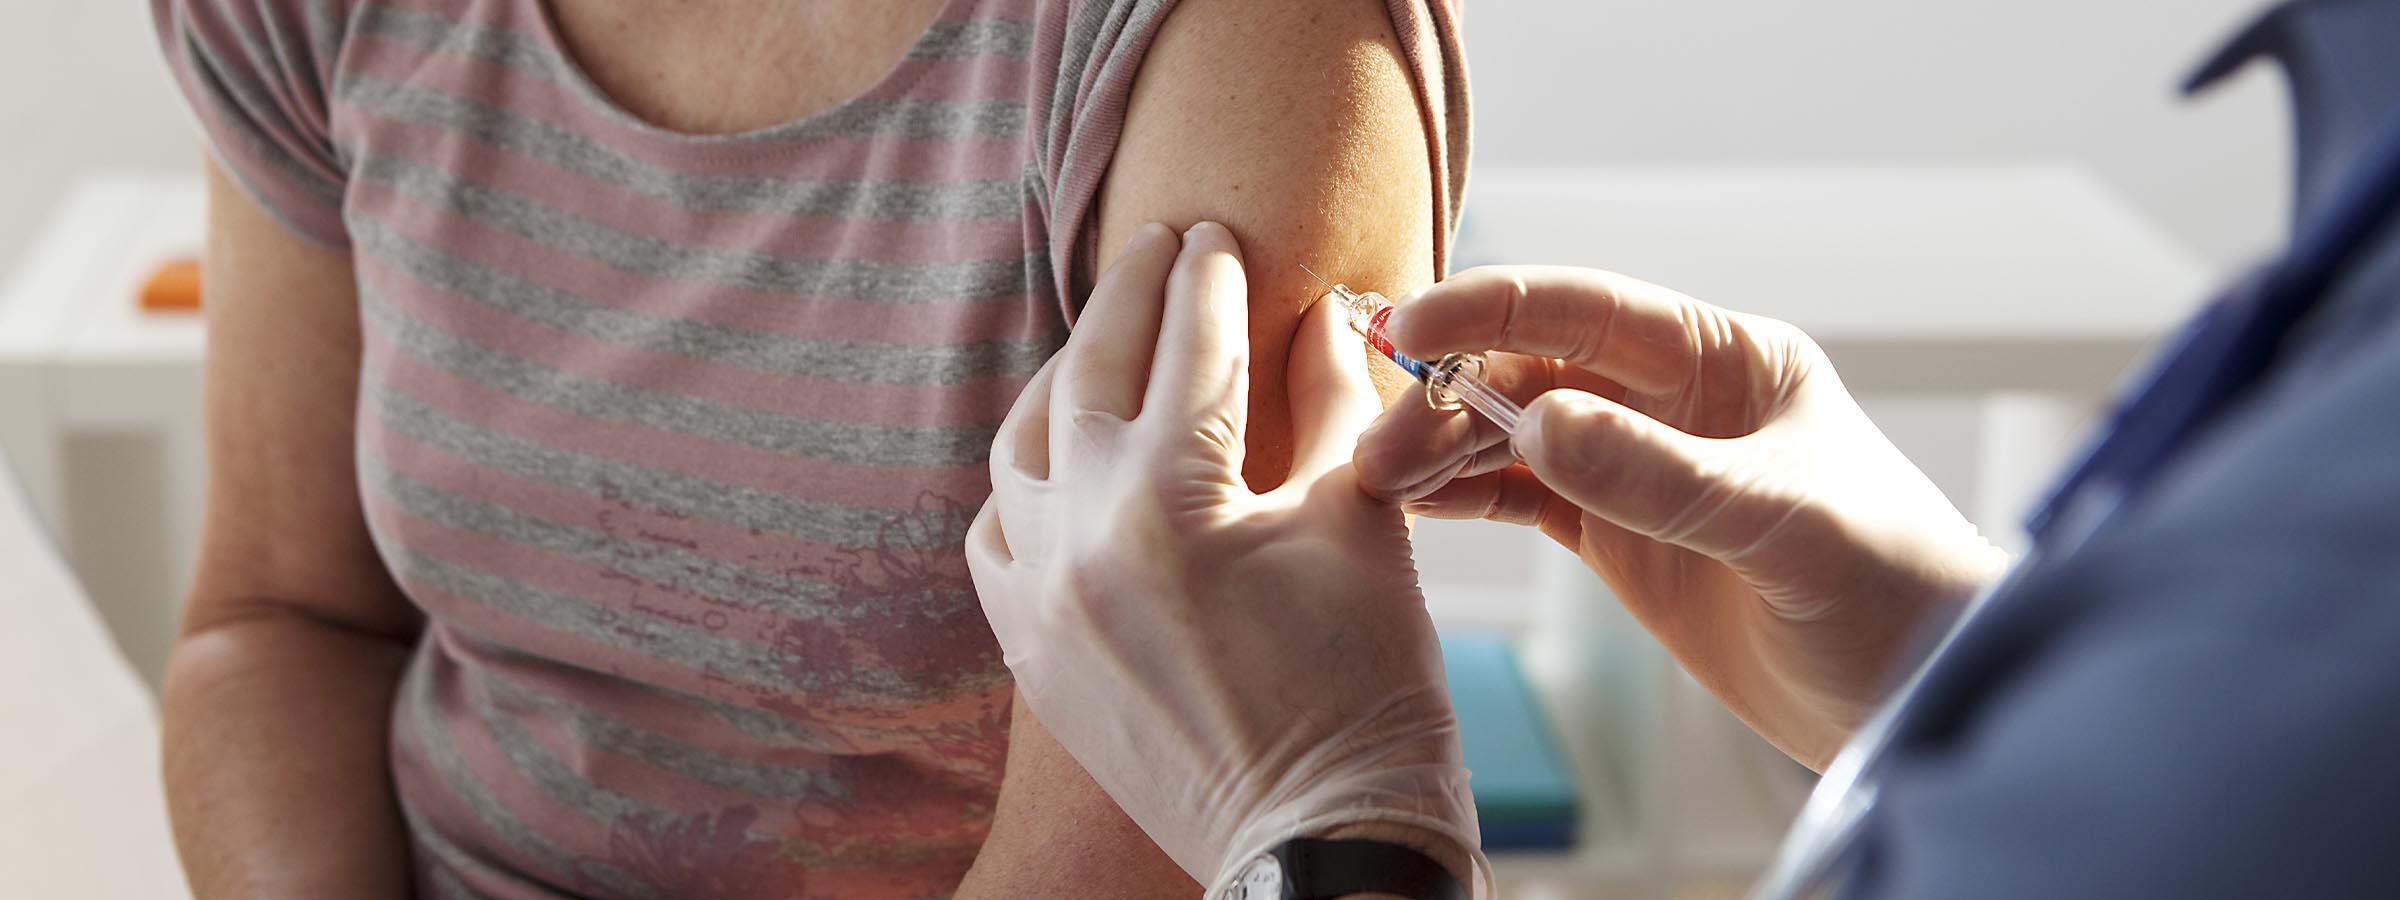 Woman receives a flu shot from doctor